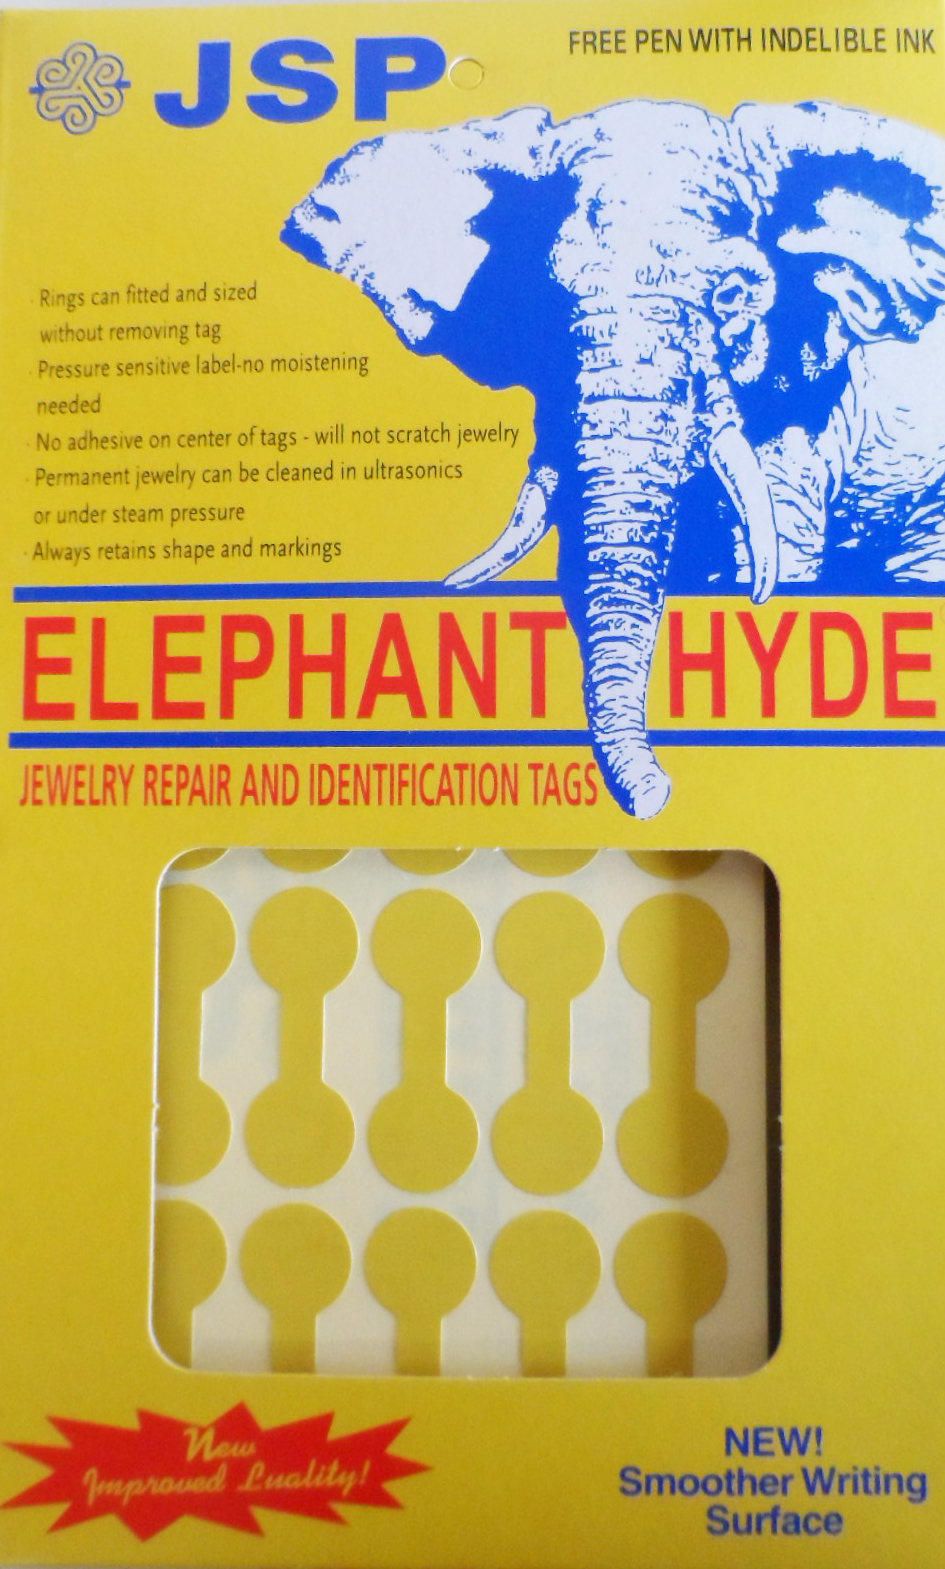 ELEPHANT HYDE TAGS GOLD REGULAR 1000 PIECES